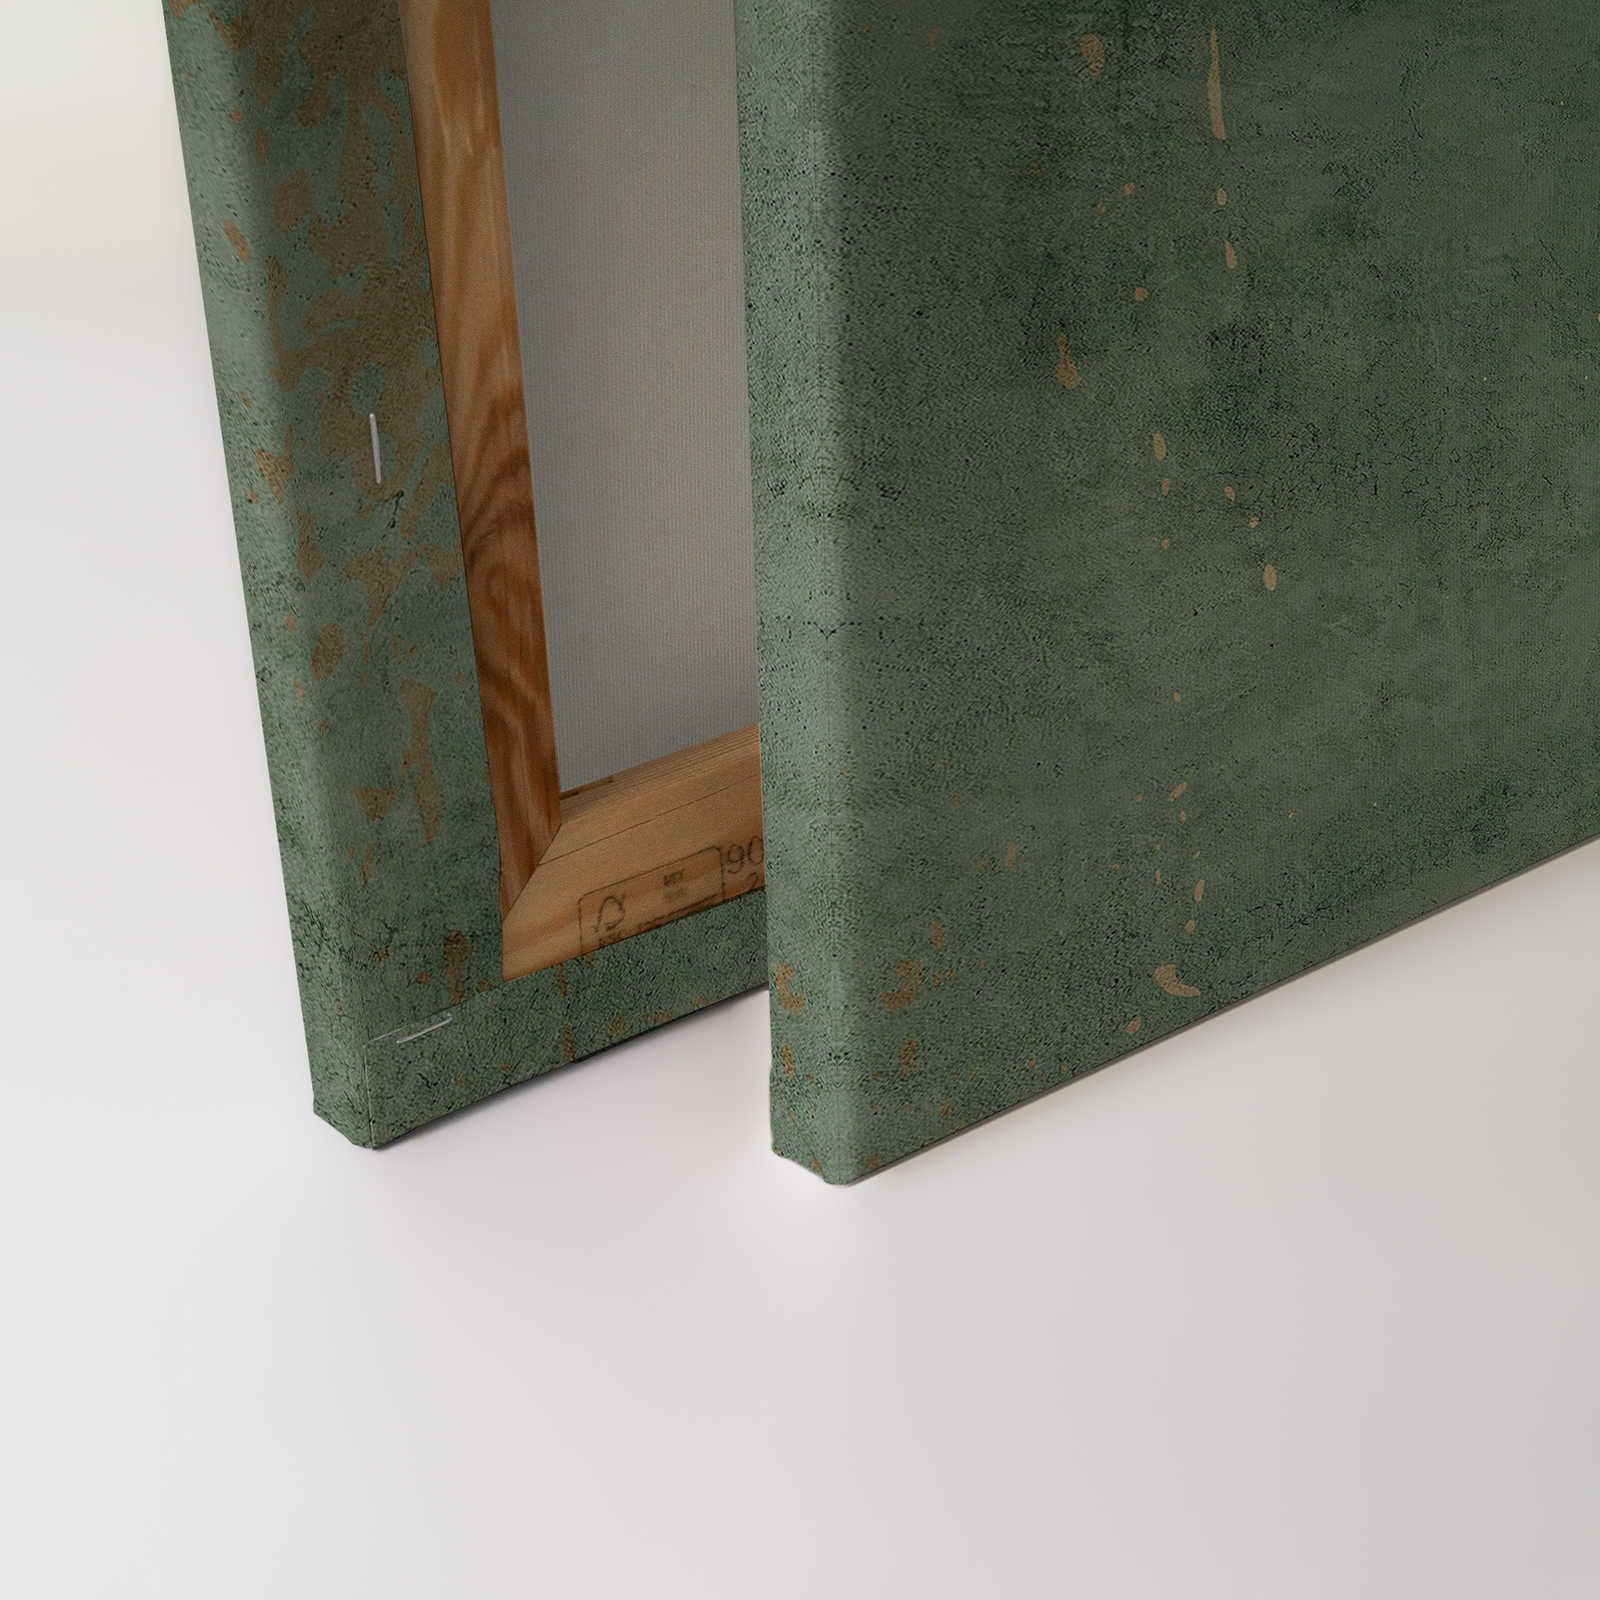             Vintage Wall 1 - Canvas painting sage green & gold plaster look in used look - 1.20 m x 0.80 m
        